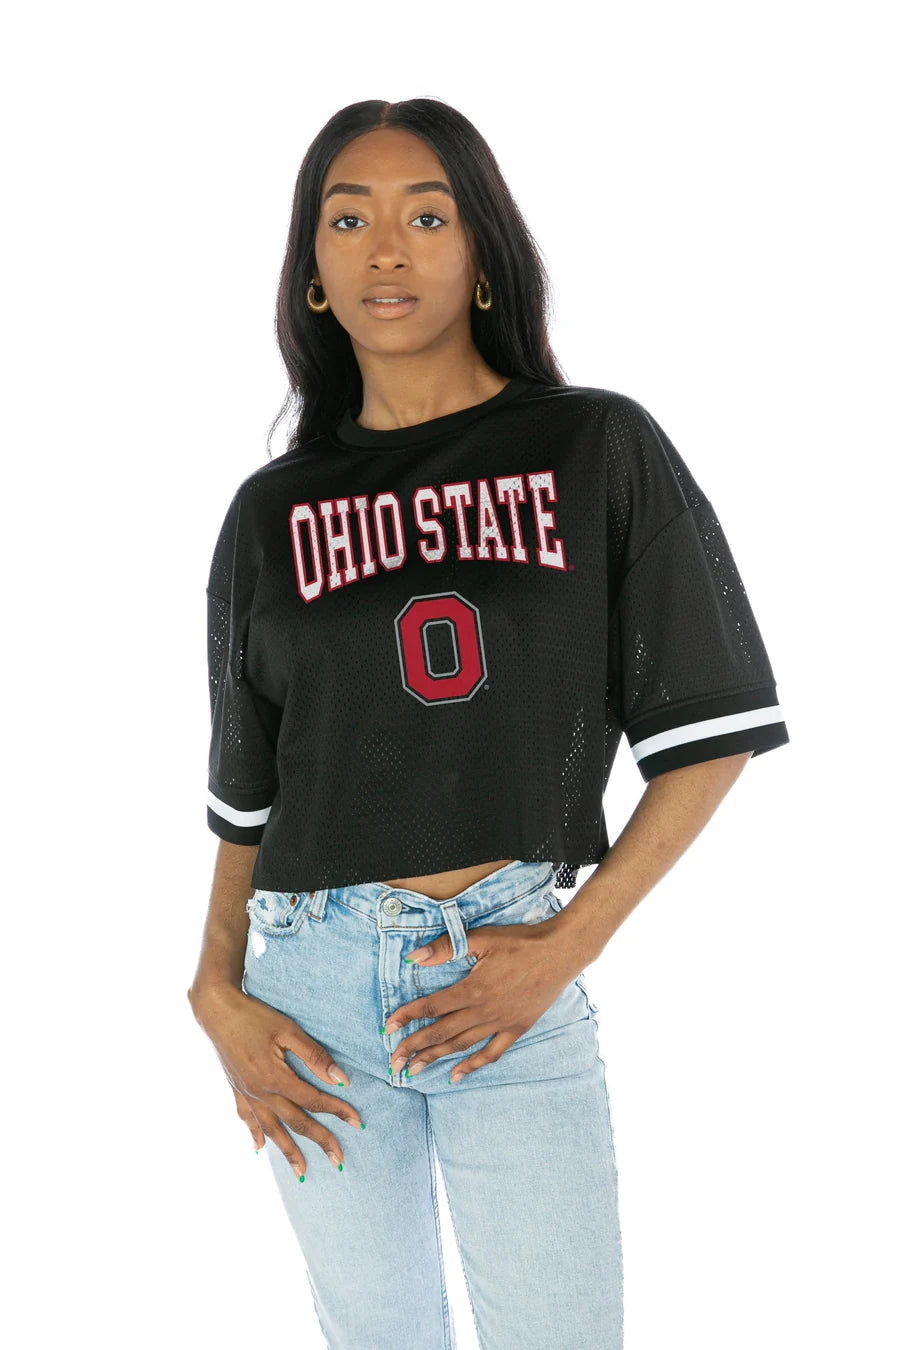 OHIO STATE BUCKEYES ROOKIE MOVE ICONIC OVERSIZED FASHION JERSEY in